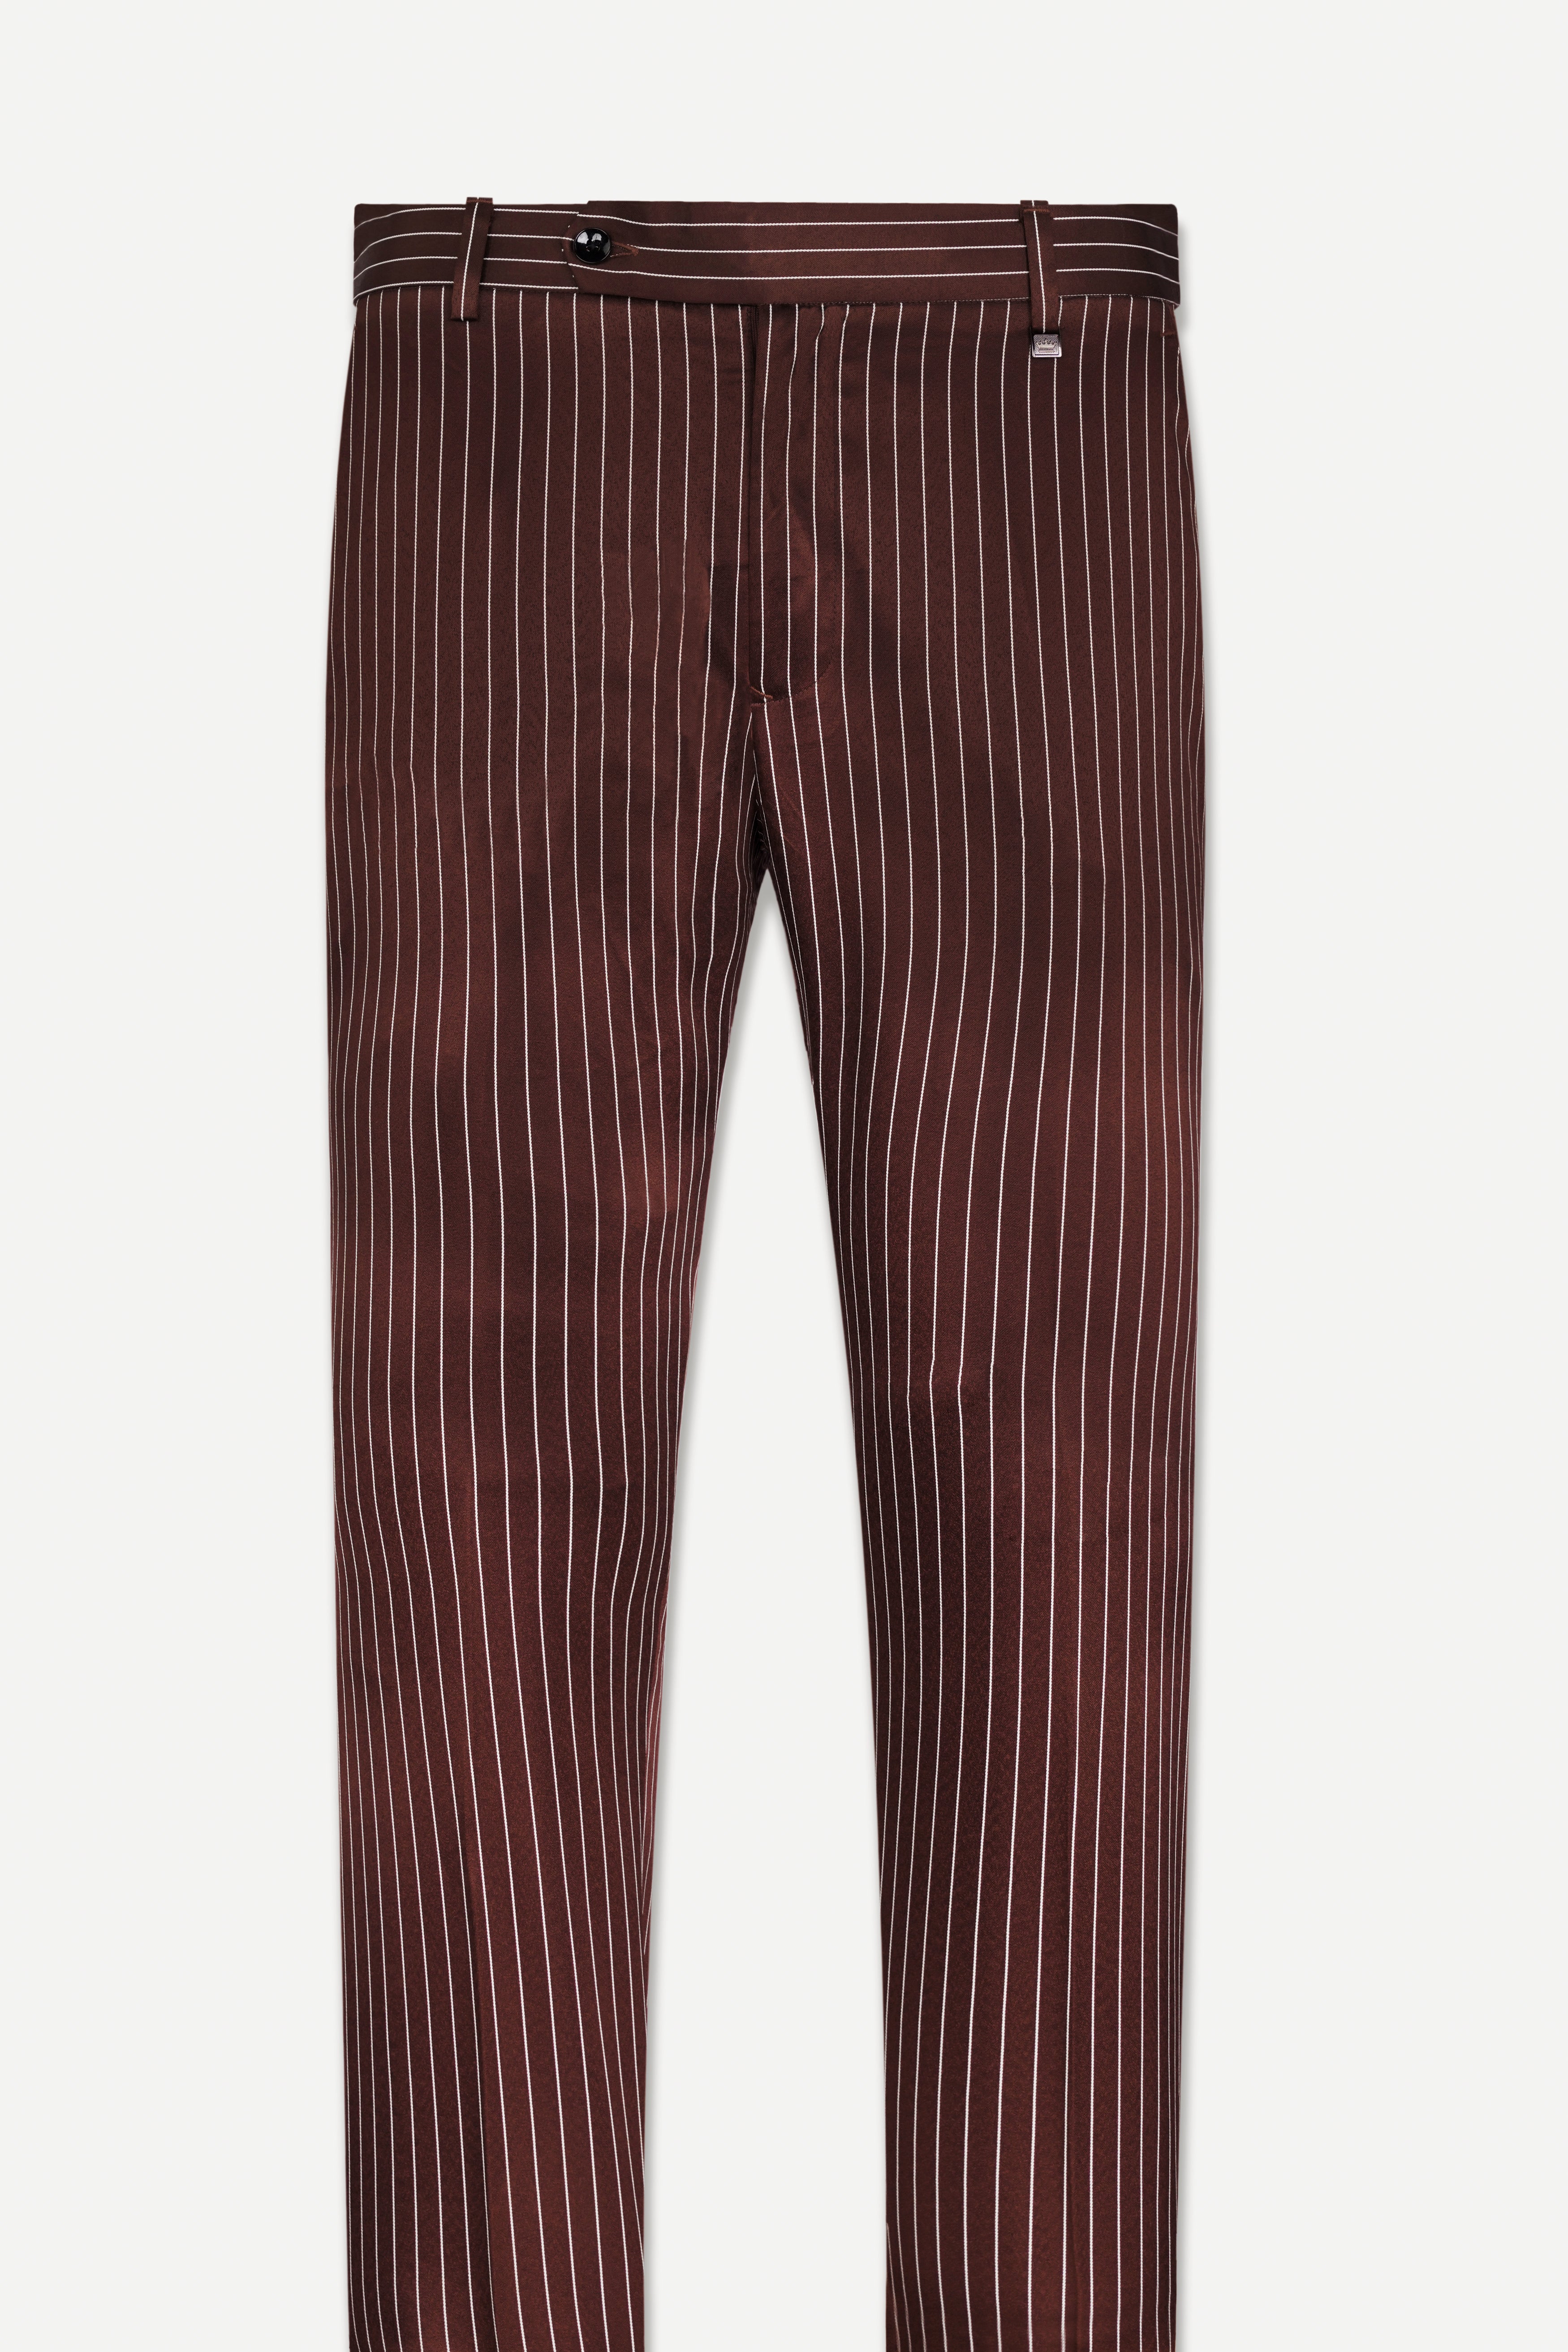 Men's Cotton Blend Gold & Offwhite Striped Formal Trousers - Sojanya